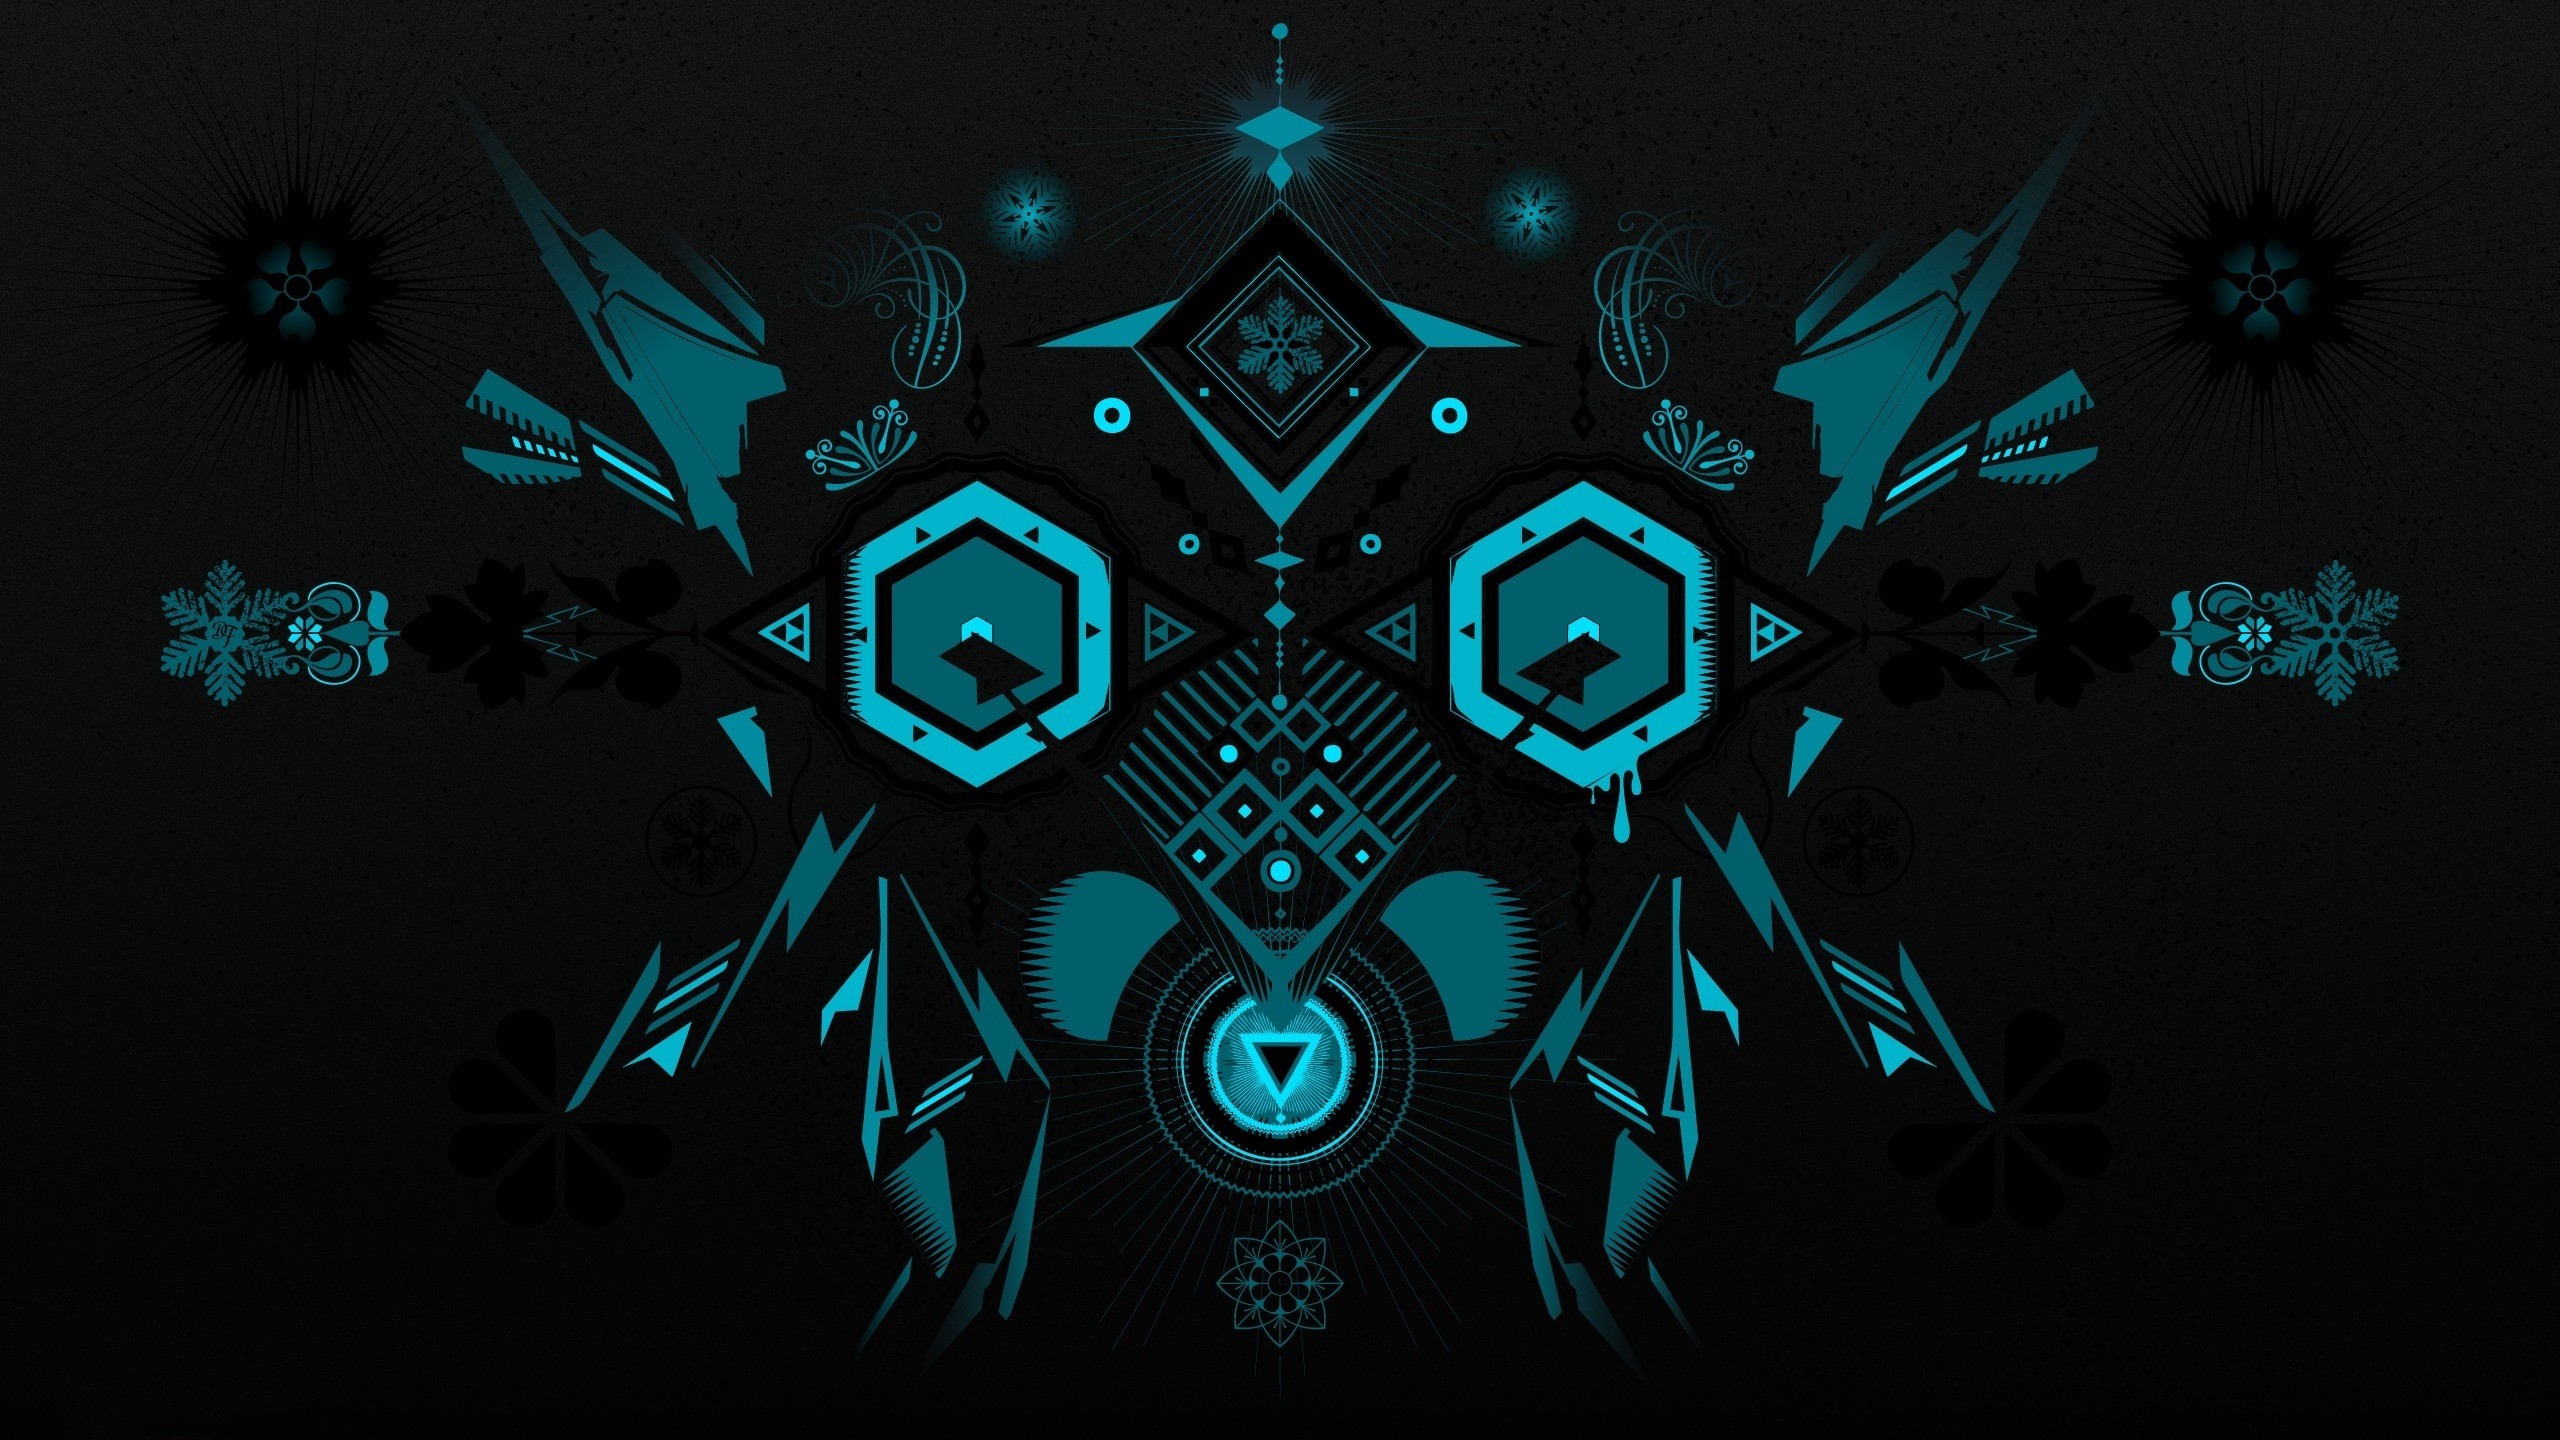 General 2560x1440 digital art black background minimalism abstract decorations geometry hexagon snowflakes imagination face triangle square circle lines owl cyan